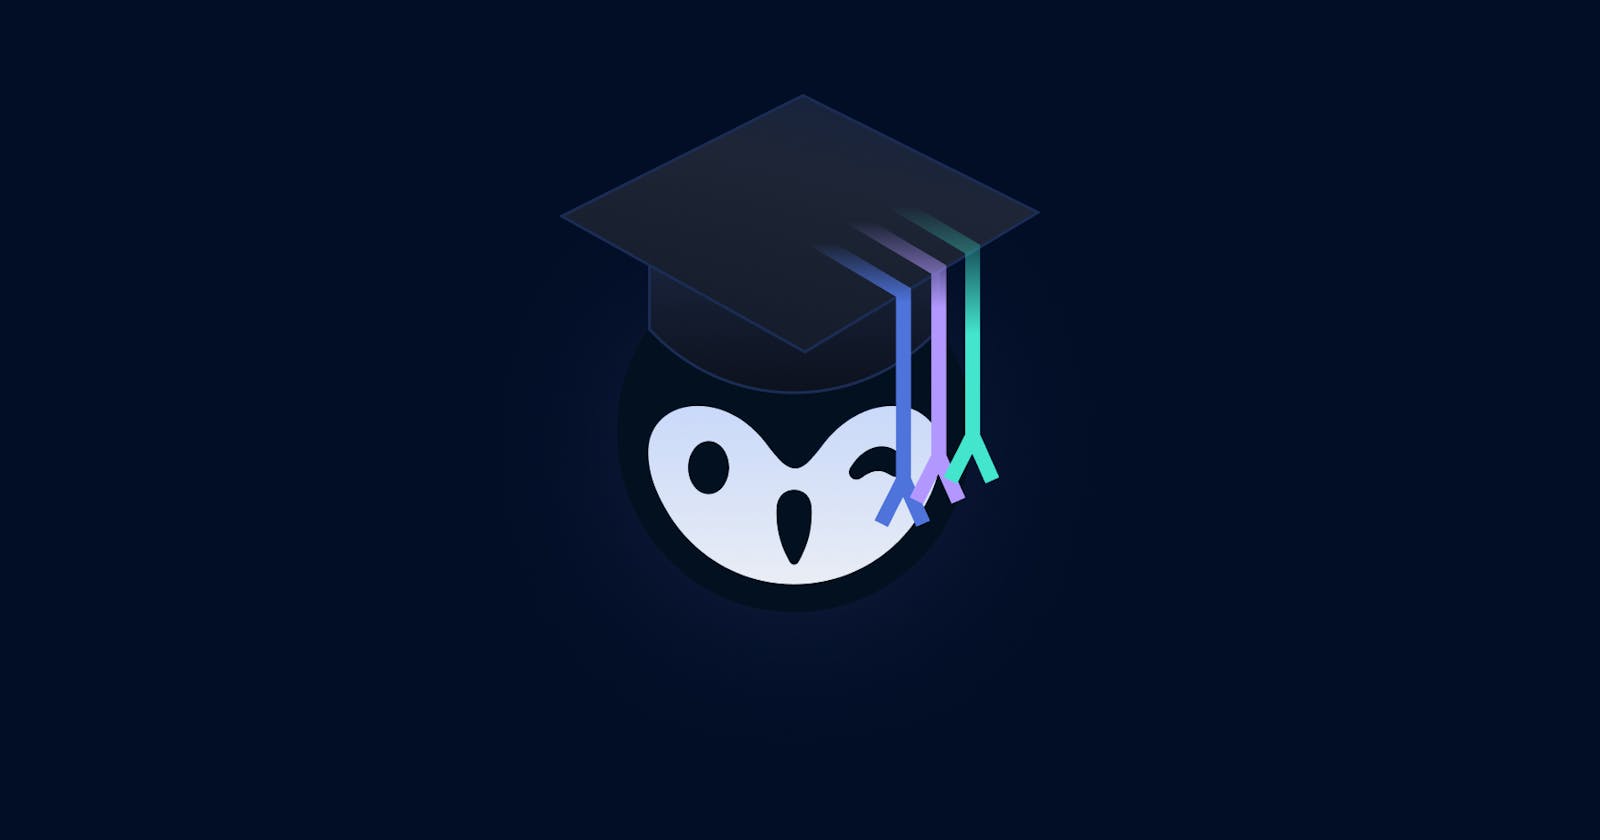 Developer Education - GitGuardian Supports Your Learning Style